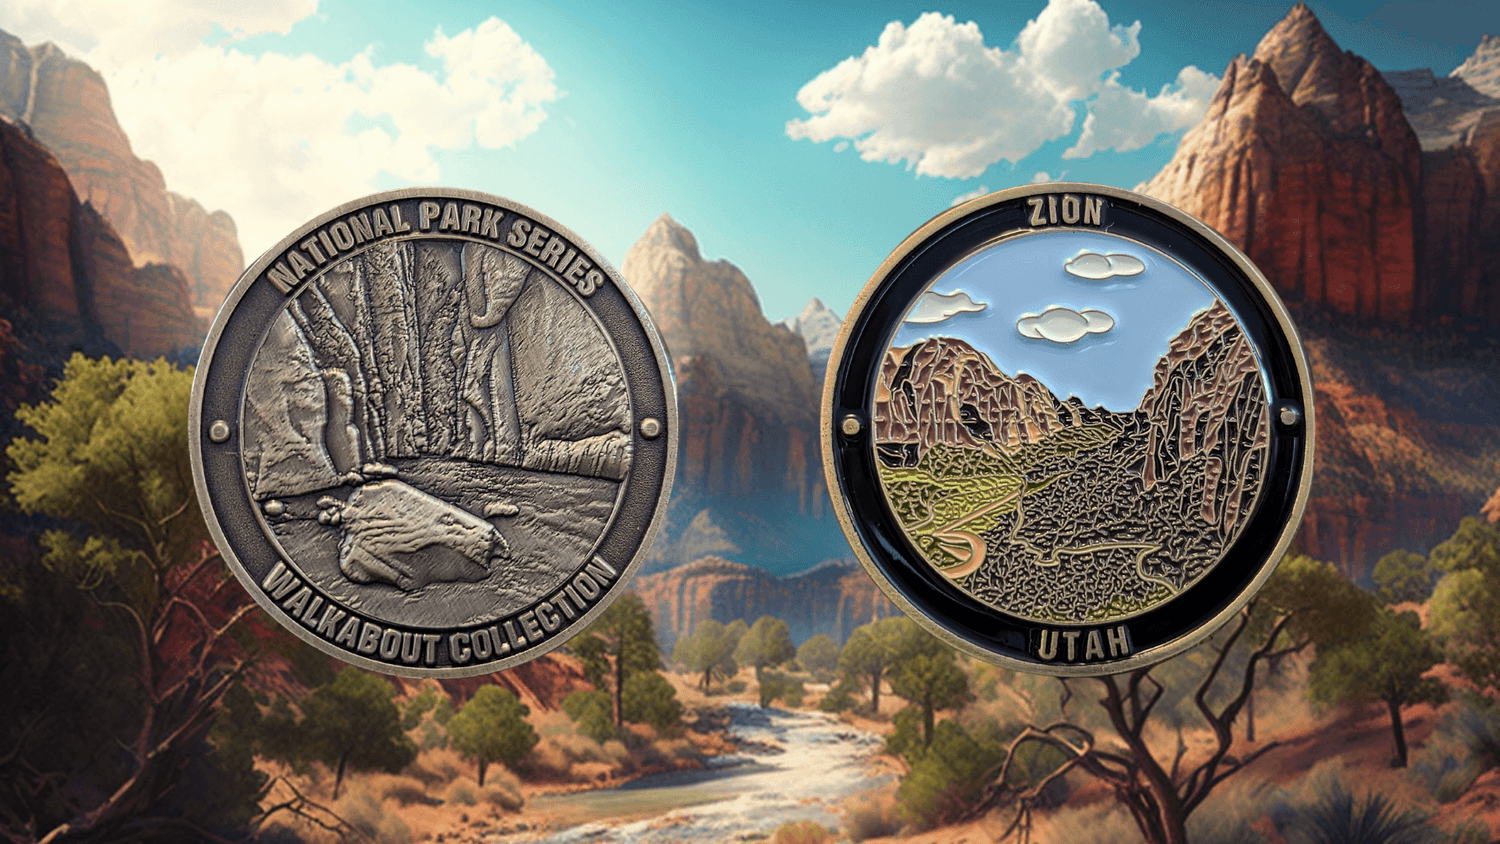 ZION NATIONAL PARK CHALLENGE COIN